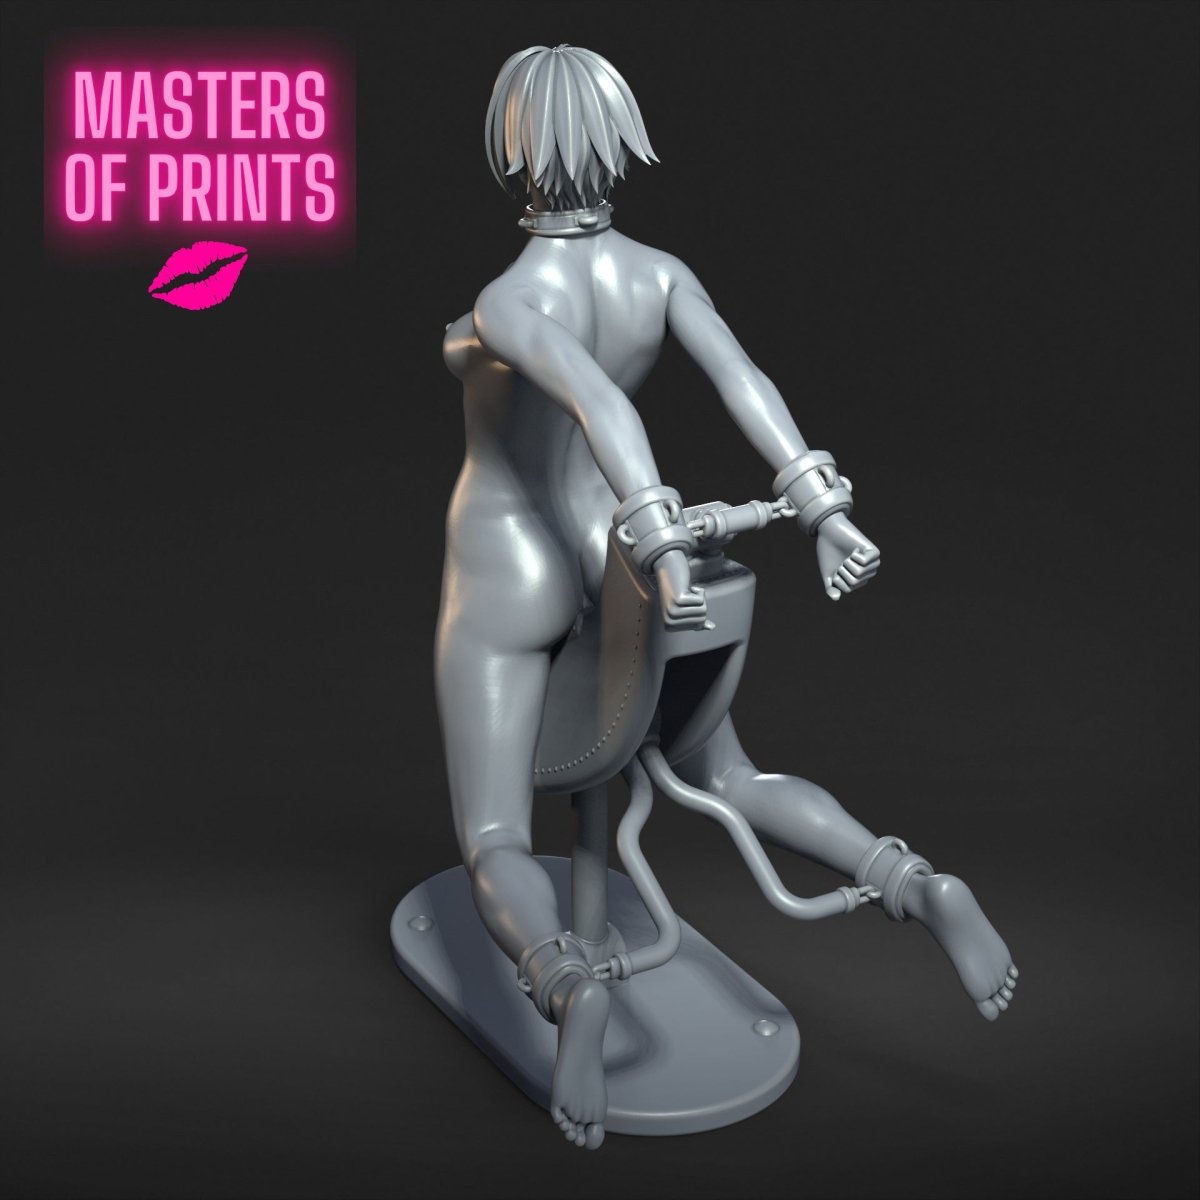 Single Bondage Chair 2 Mature 3d Printed miniature FanArt by Masters Of Prints Collectables Statues & Figurines